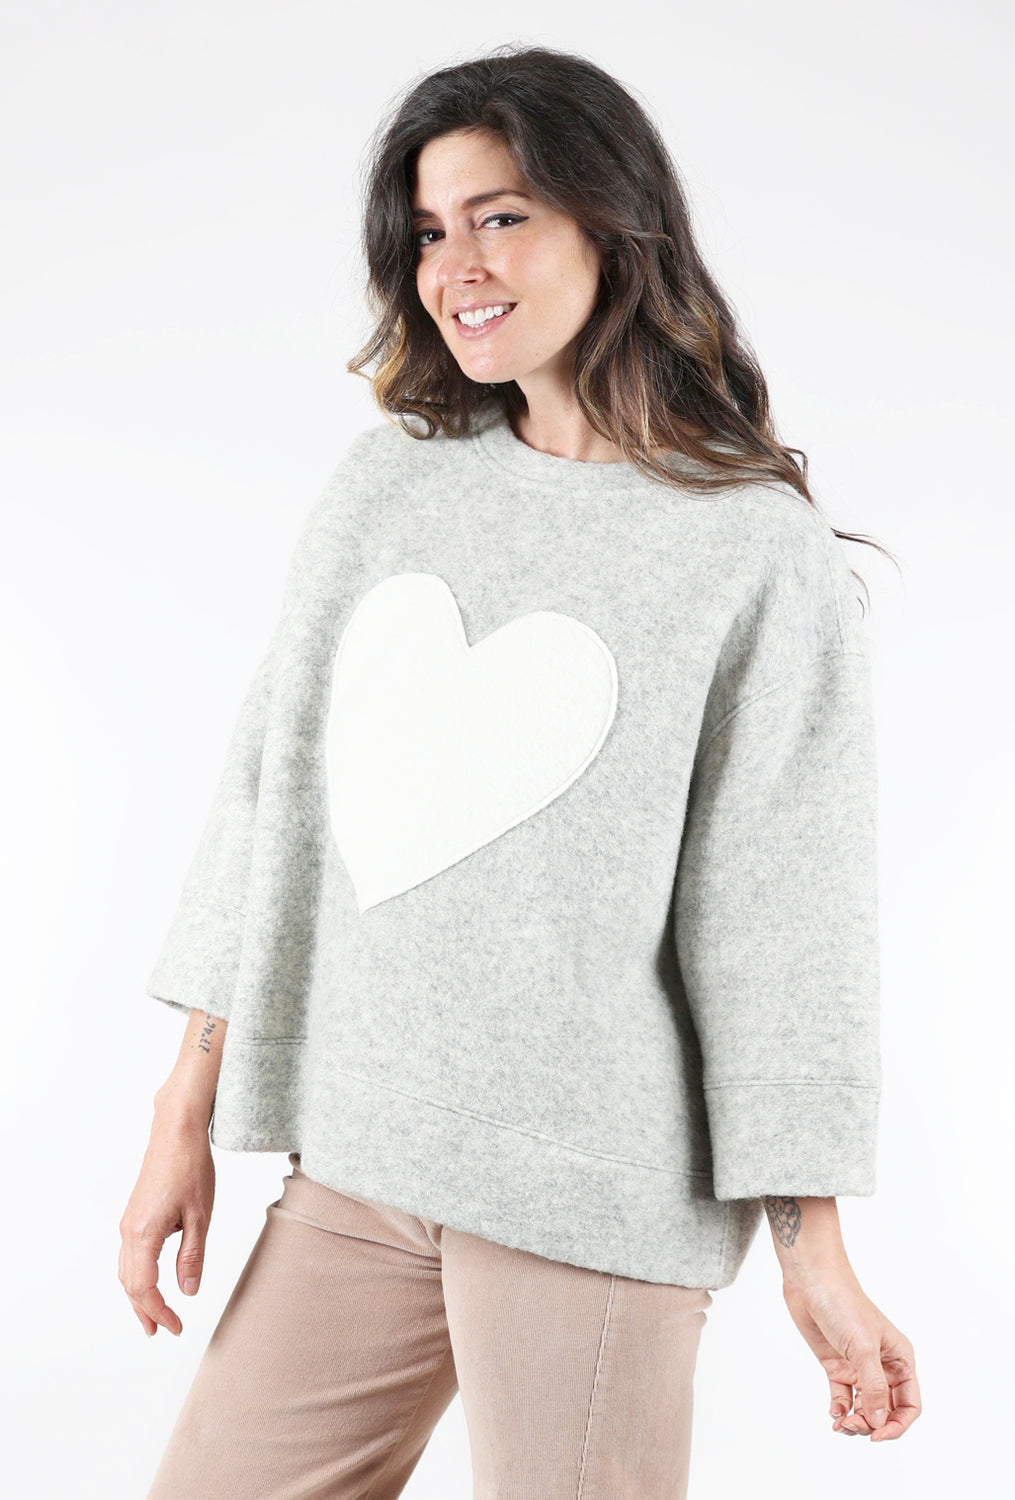 Go Lightly Boiled-Wool Heart Top, Gray/Ivory 